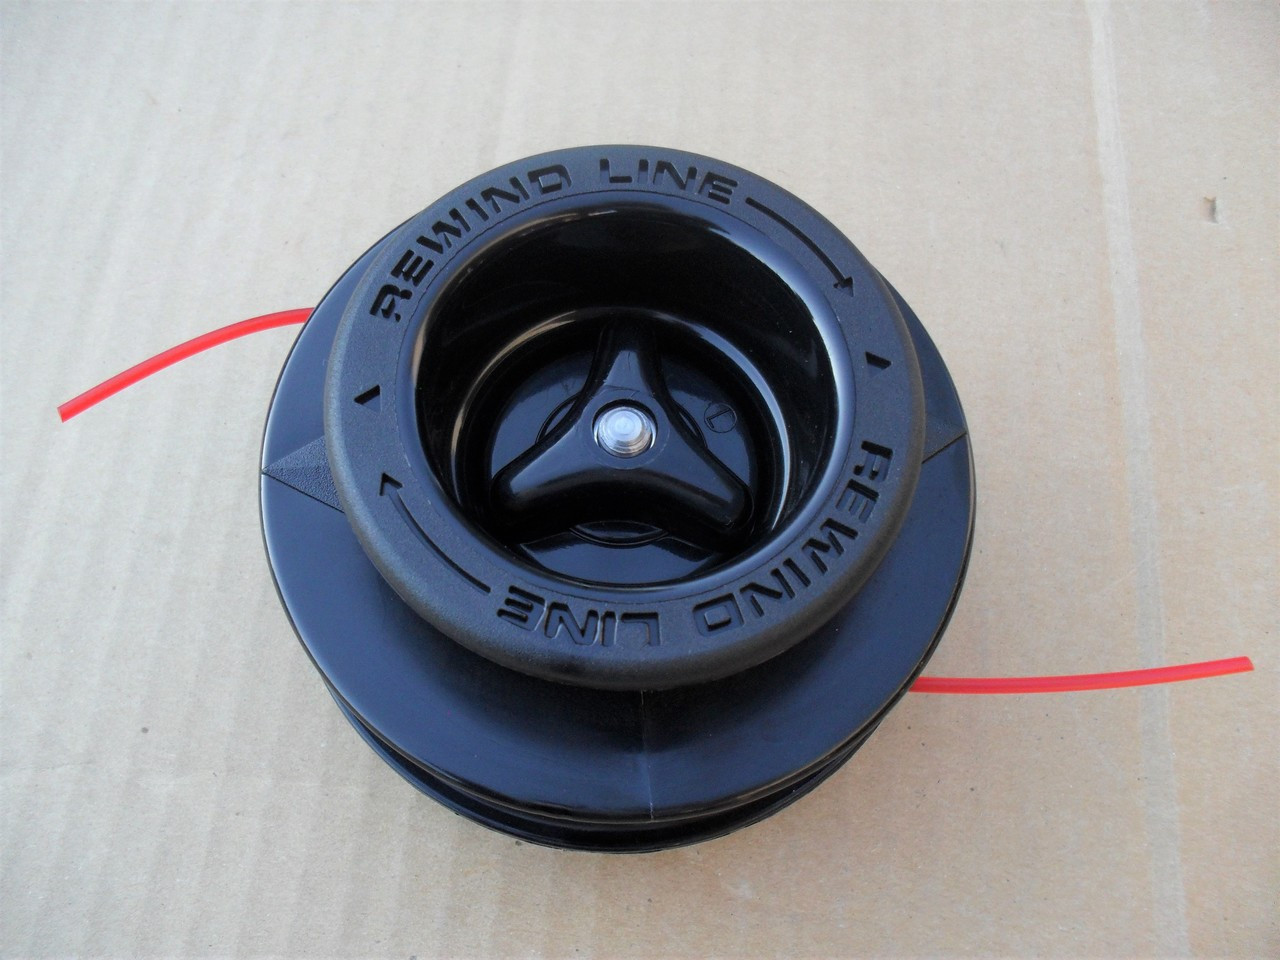 Twist Feed String Trimmer Head for Sears 79532, 79534, 79541, 79542, 79551, 79552, 79555, 79556, 79561, 79565, 79570, 79580, 79819, 79680, 79690, 79717, 79719, 79812, 79813, 79814, 79819, 79853, 79854, 79855, 79857, 636-79545, 636-79558, 385-407